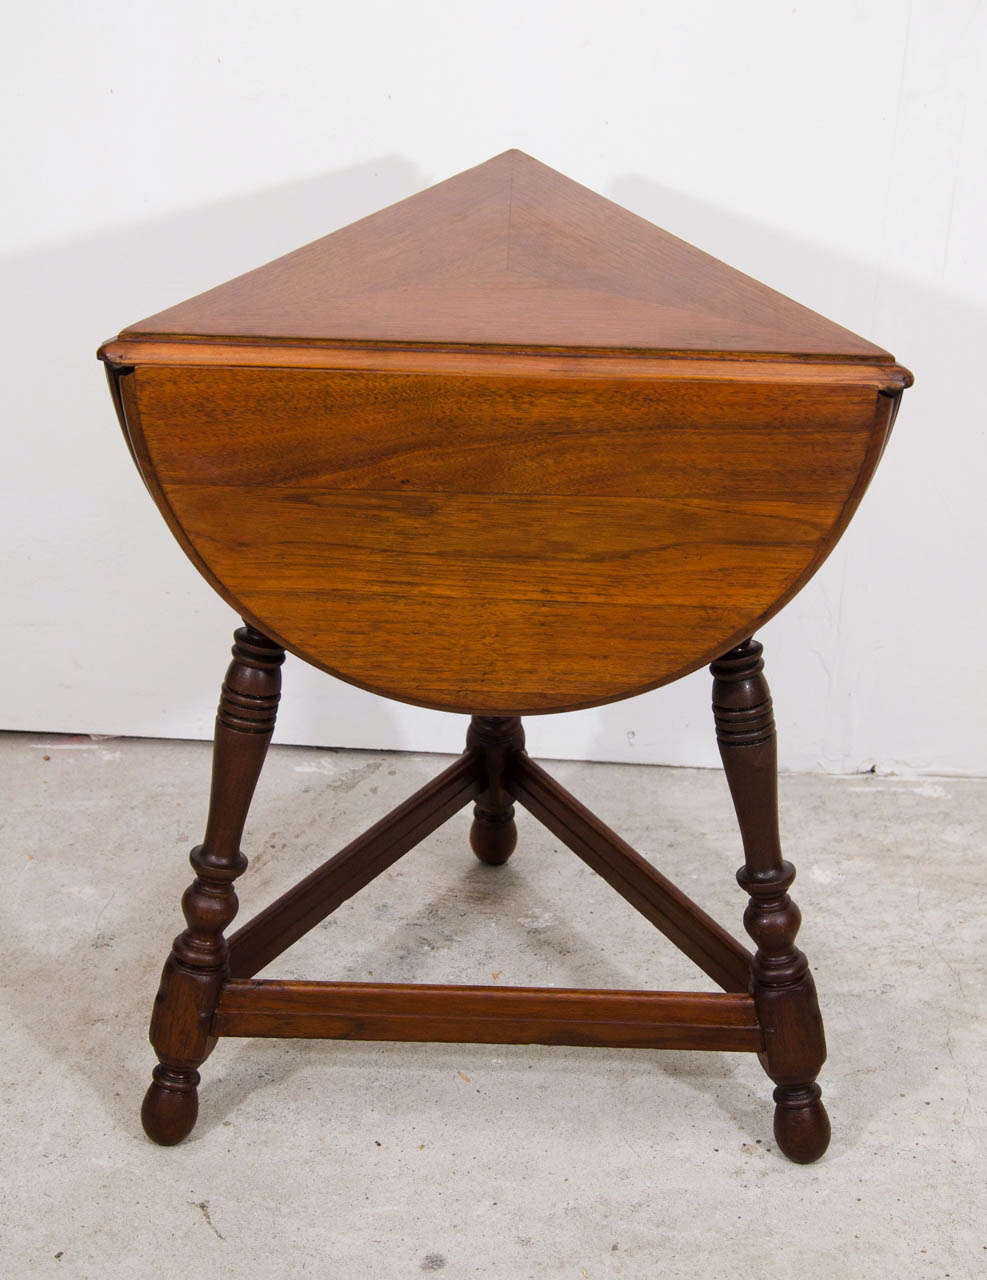 A beautiful early 19th century English solid walnut folding top cricket  table.